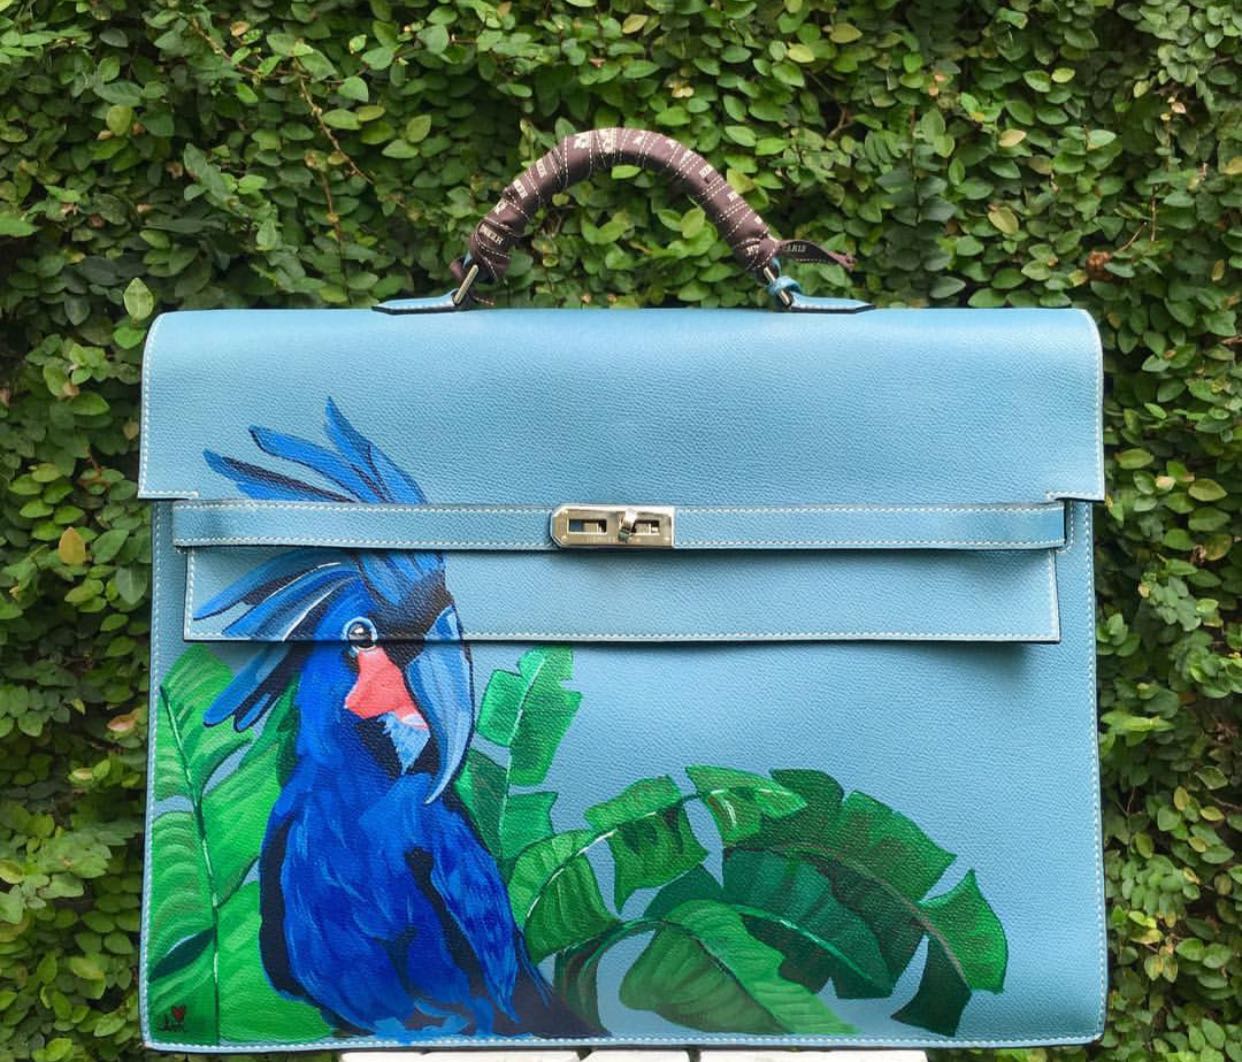 Heart Evangelista paints Hermes bag with the 'language of her soul